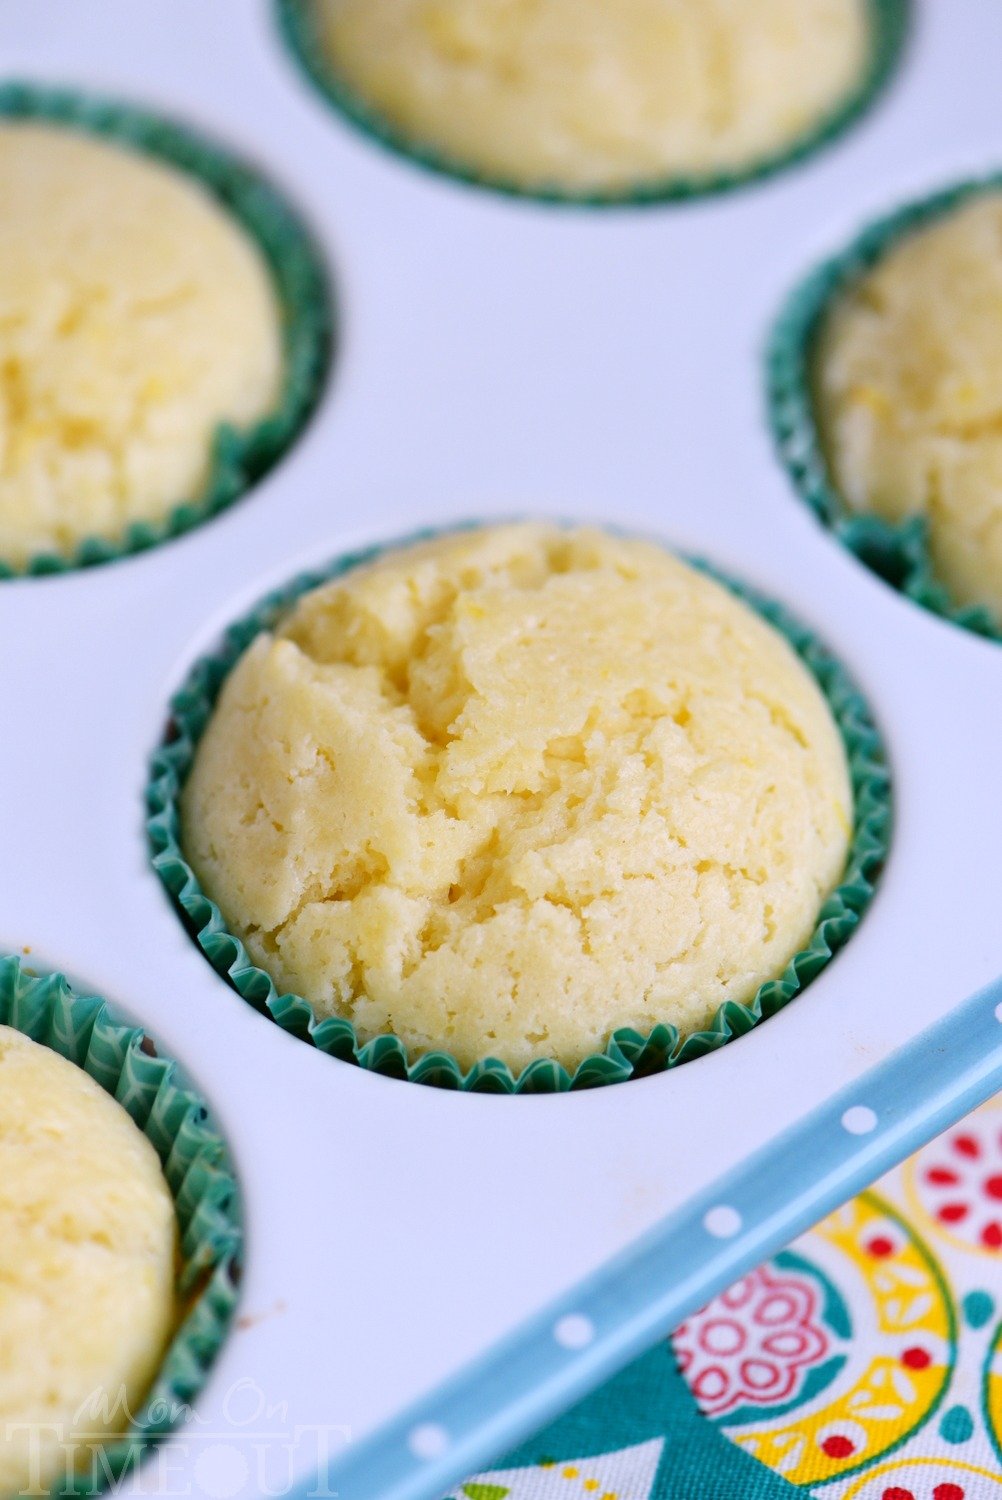 These Skinny Lemon Muffins are made with Greek yogurt, coconut oil and plenty of lemon zest for a fabulous bright, lemon flavor! So tender and moist, these muffins are a great way to start to your day! // Mom On Timeout